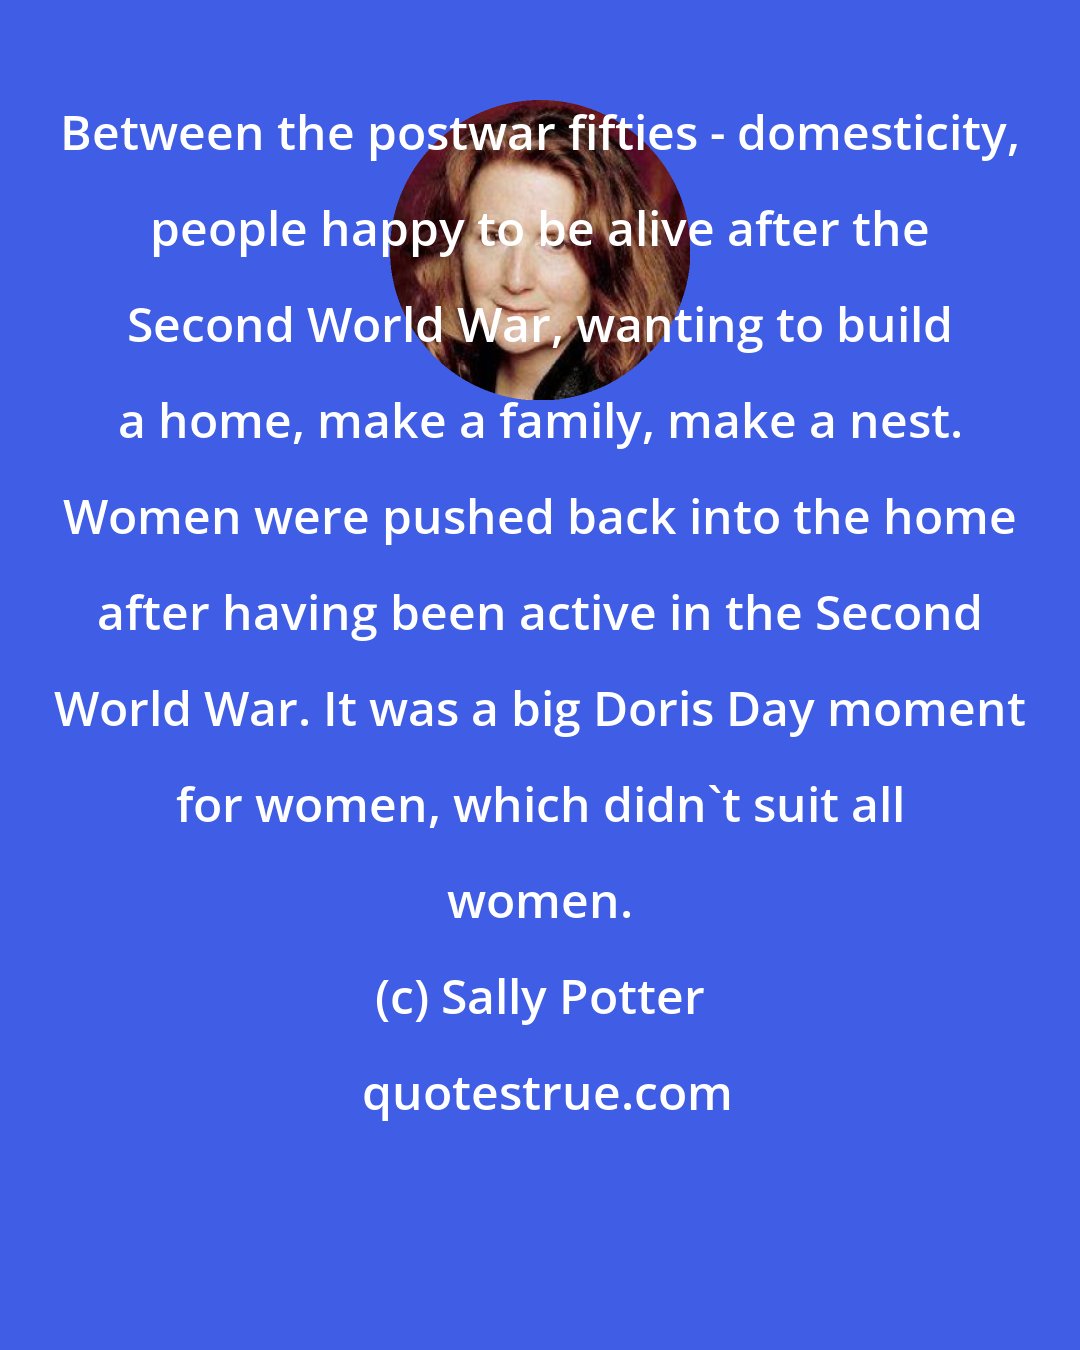 Sally Potter: Between the postwar fifties - domesticity, people happy to be alive after the Second World War, wanting to build a home, make a family, make a nest. Women were pushed back into the home after having been active in the Second World War. It was a big Doris Day moment for women, which didn't suit all women.